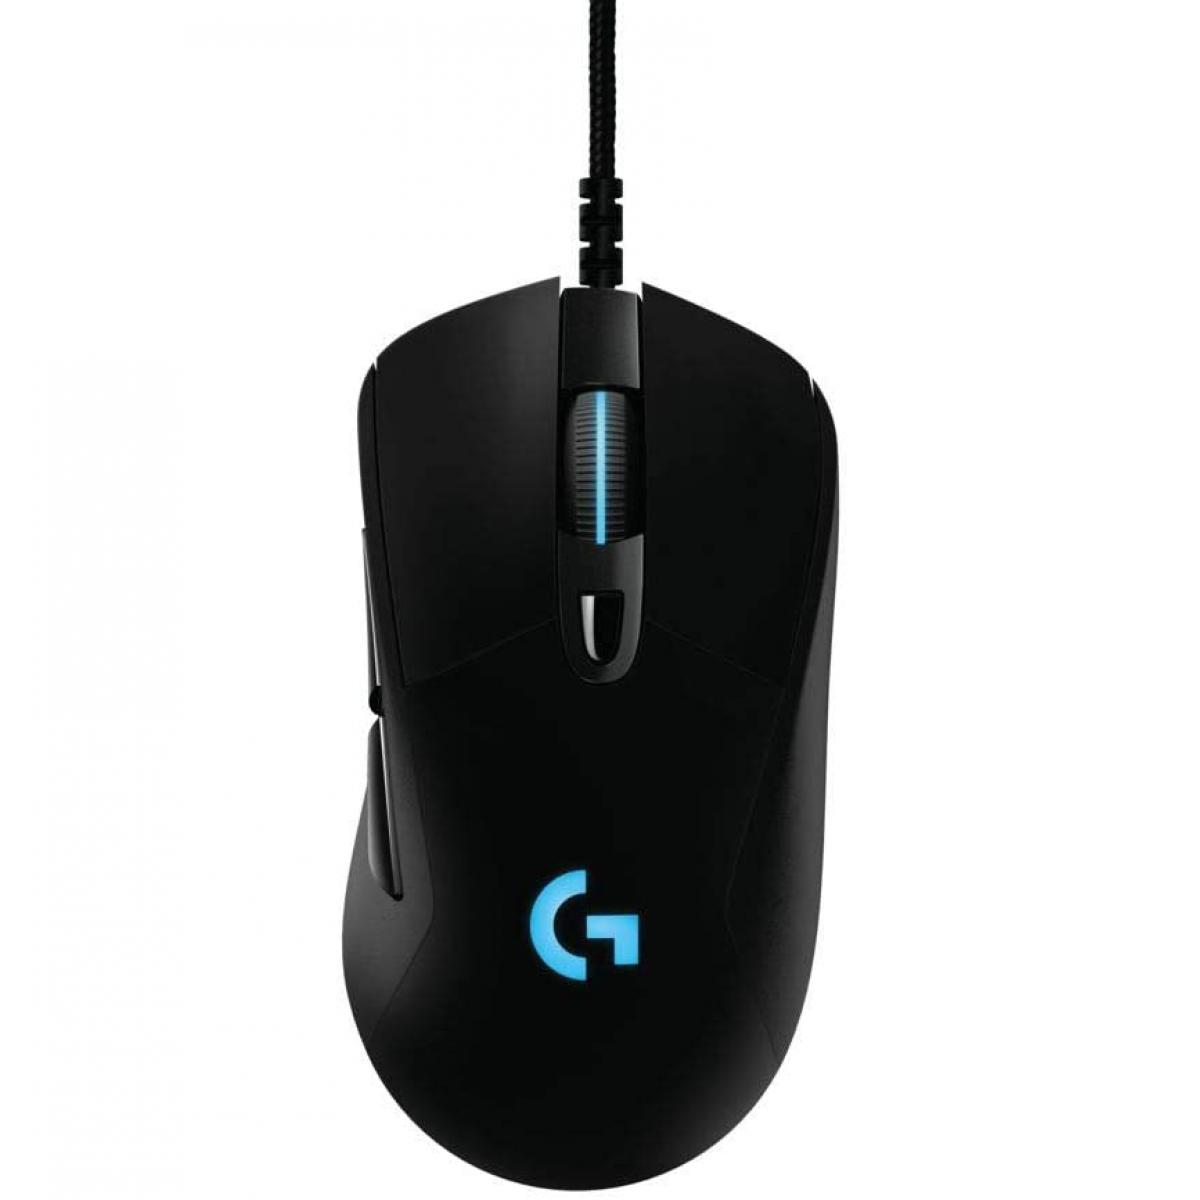 logitech gaming software not detecting mouse g403